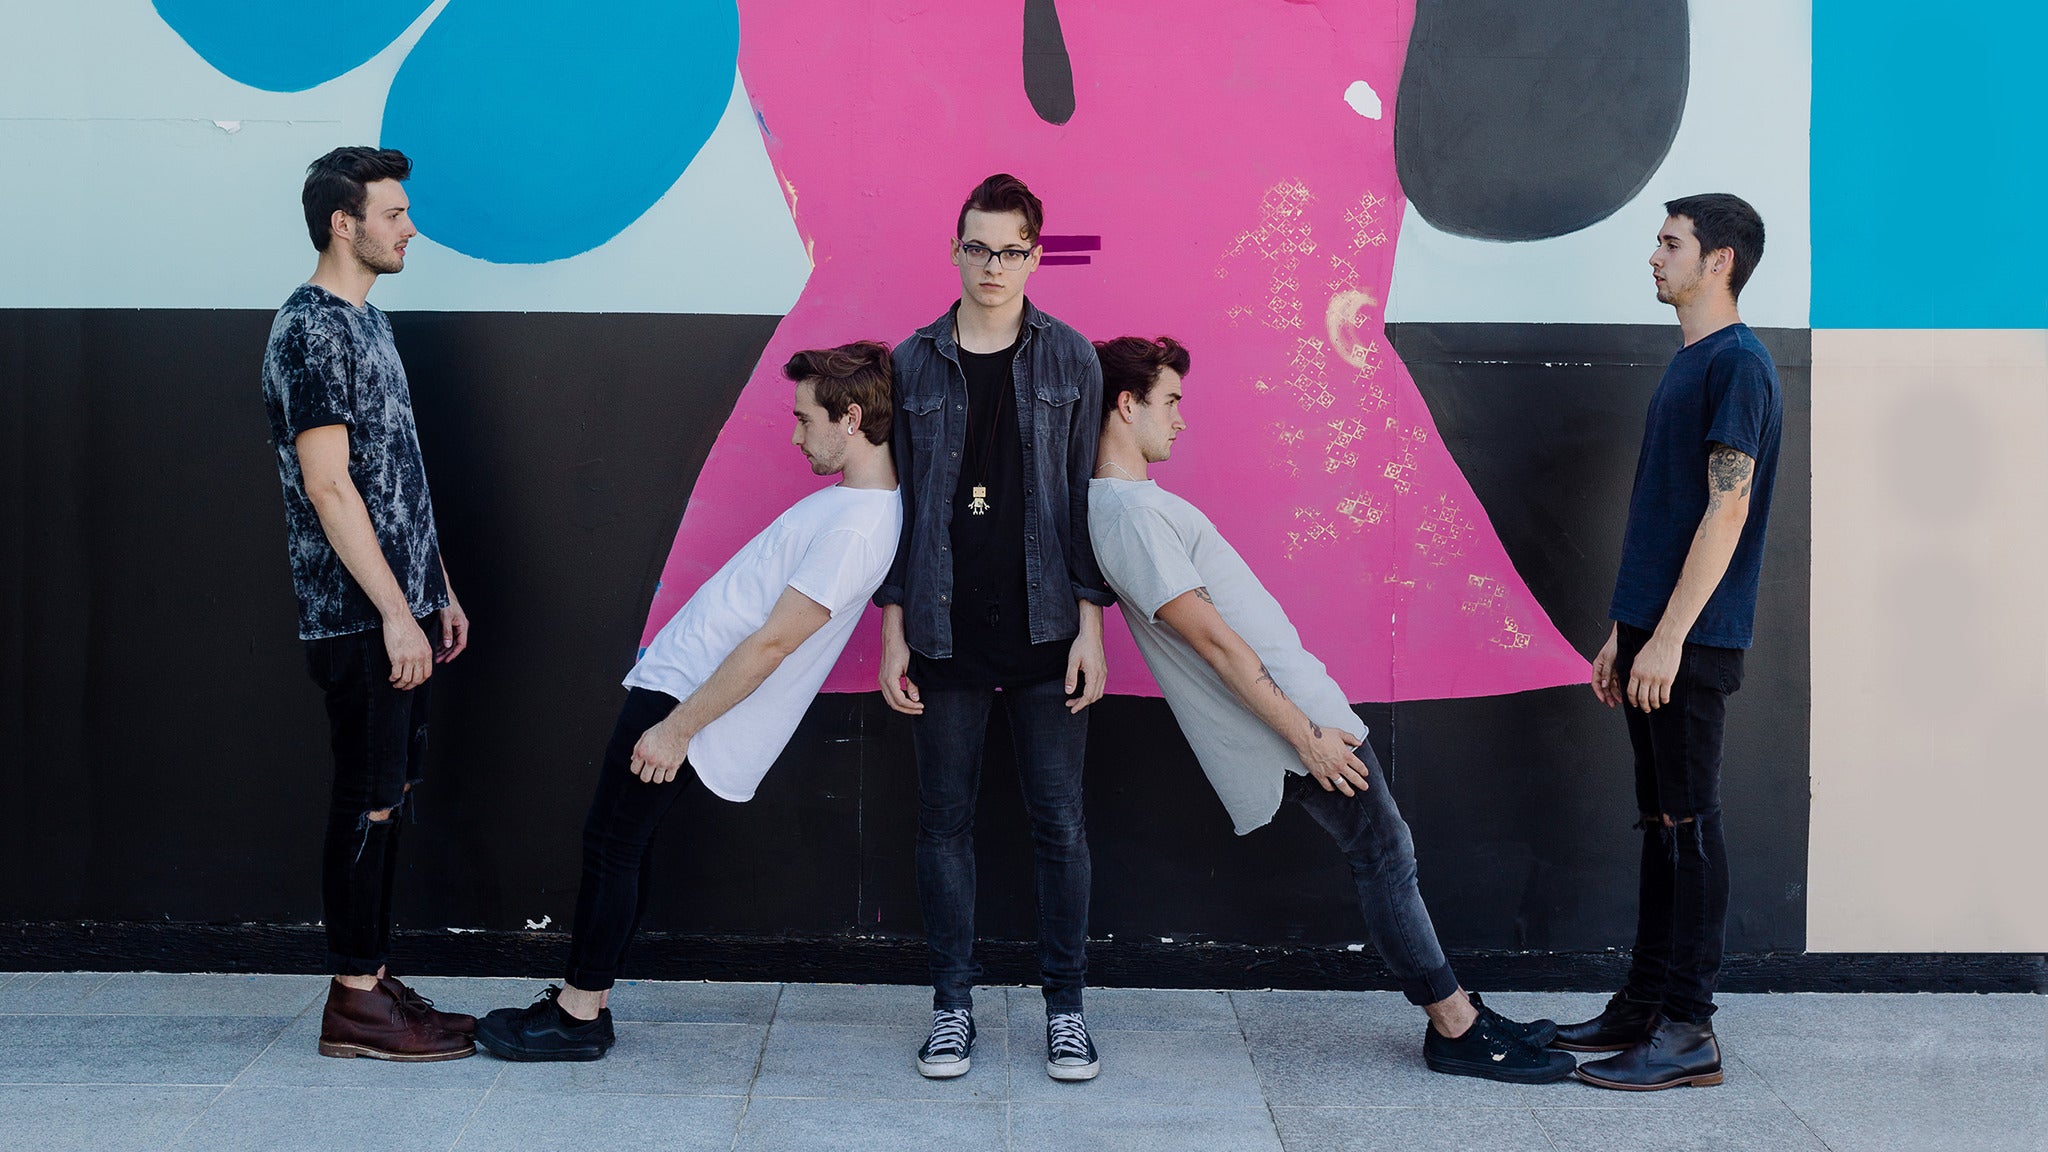 The Wrecks in NEW HAVEN promo photo for The Wrecks presale offer code